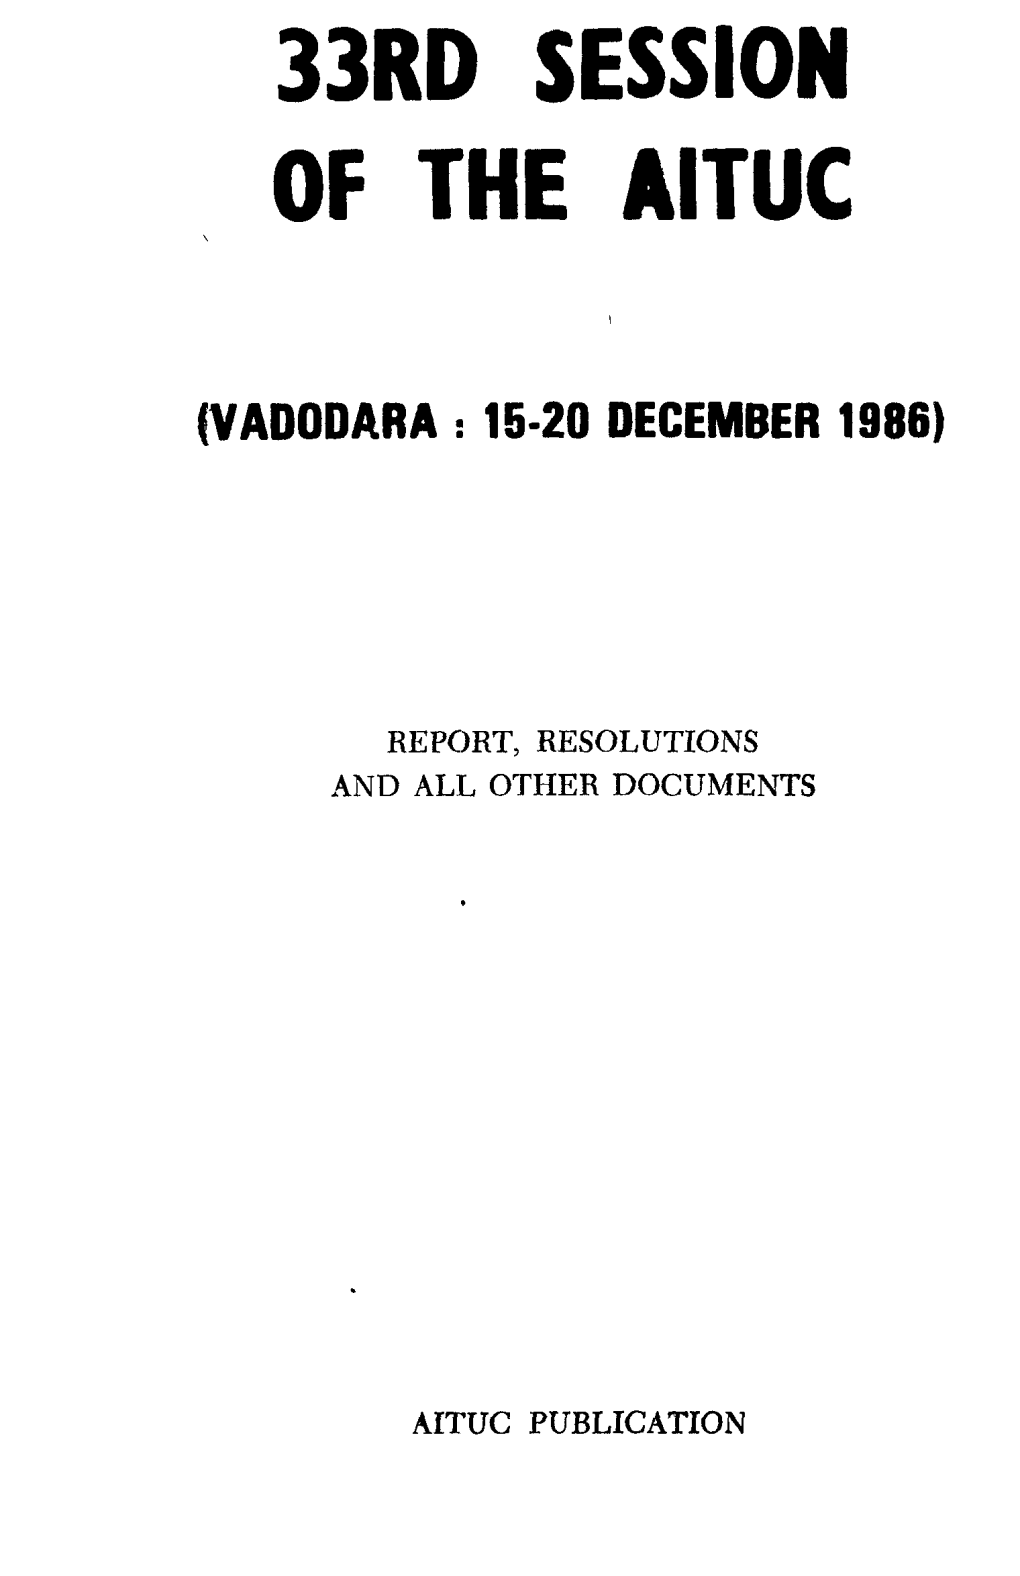 33Rd Session of the AITUC, Vadodara 15-20 December 1986